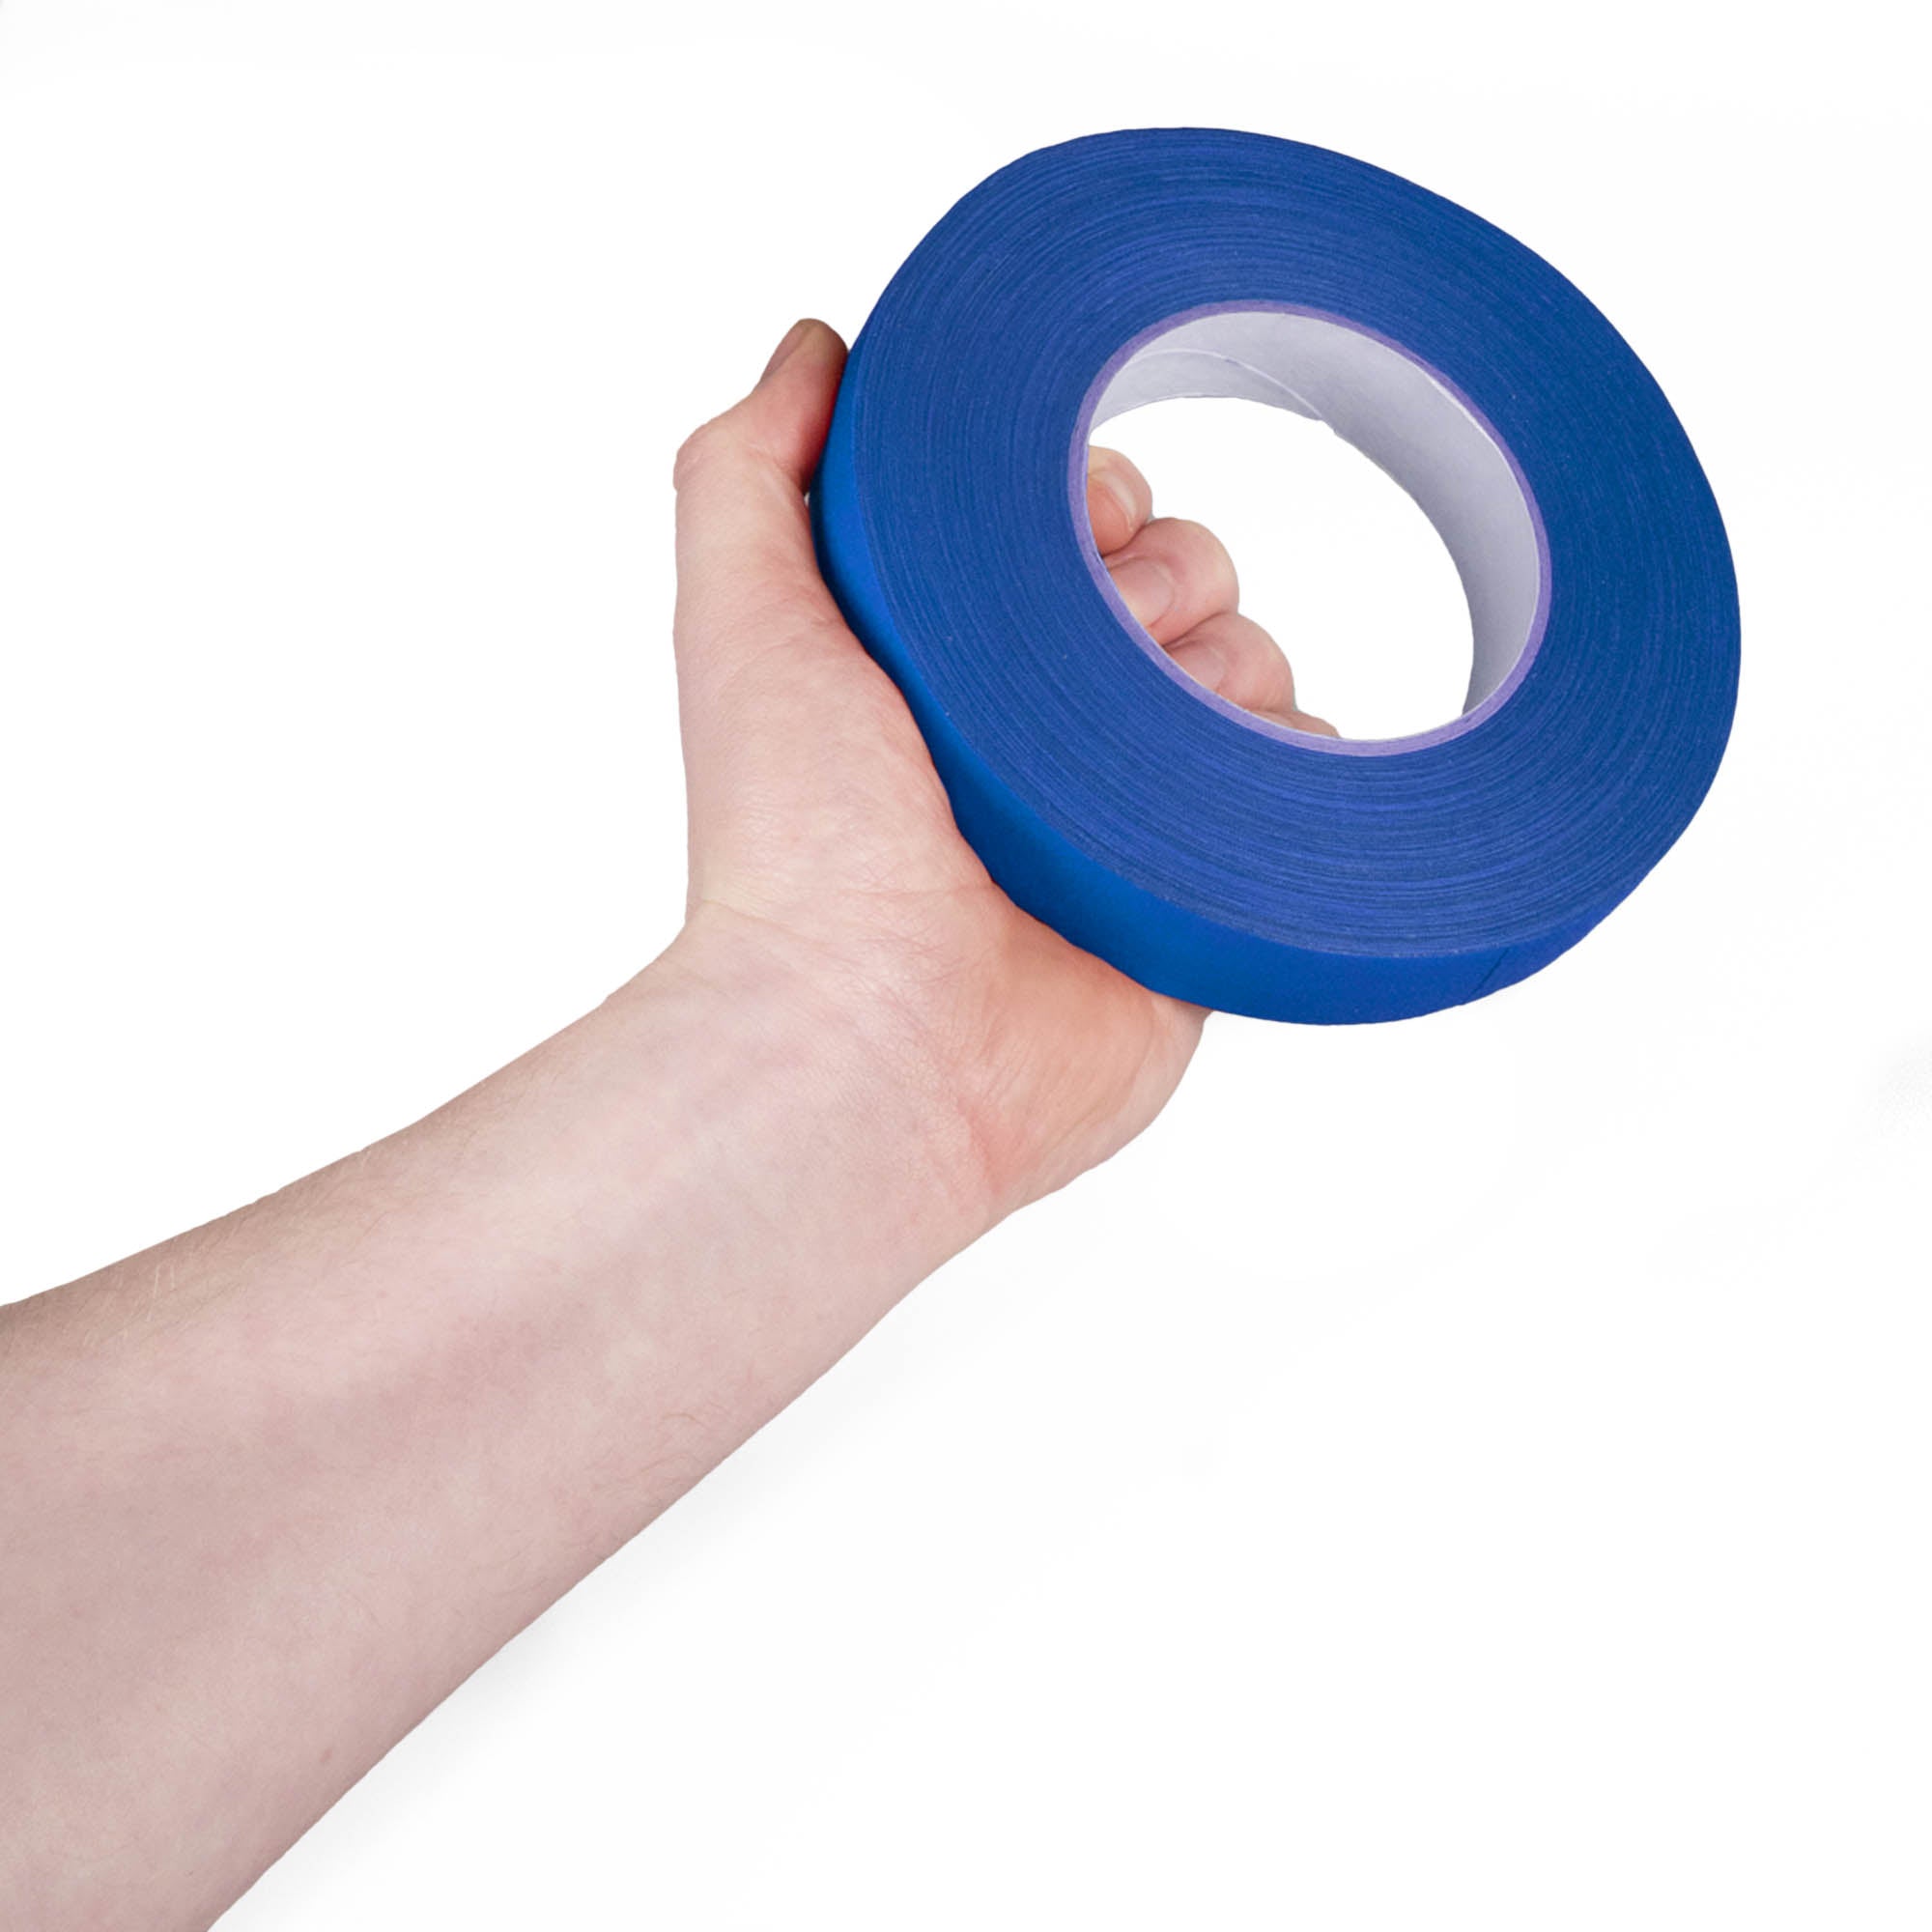 blue 2.5cm wide tape in hand